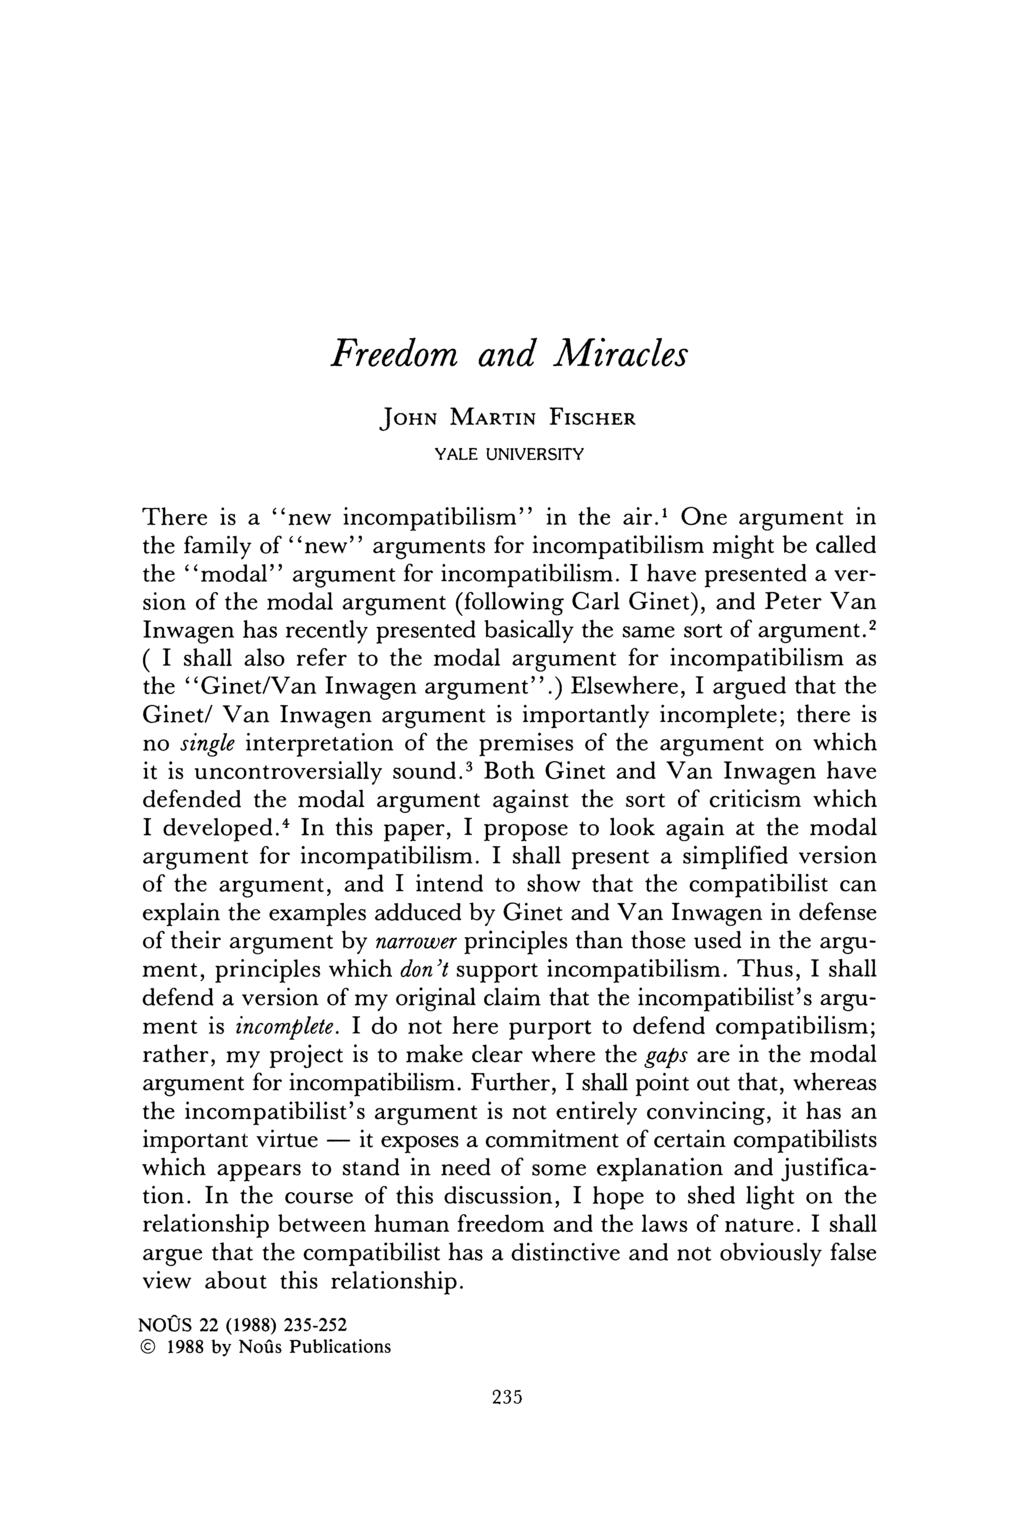 Freedom and Miracles JOHN MARTIN FISCHER YALE UNIVERSITY There is a "new incompatibilism" in the air.